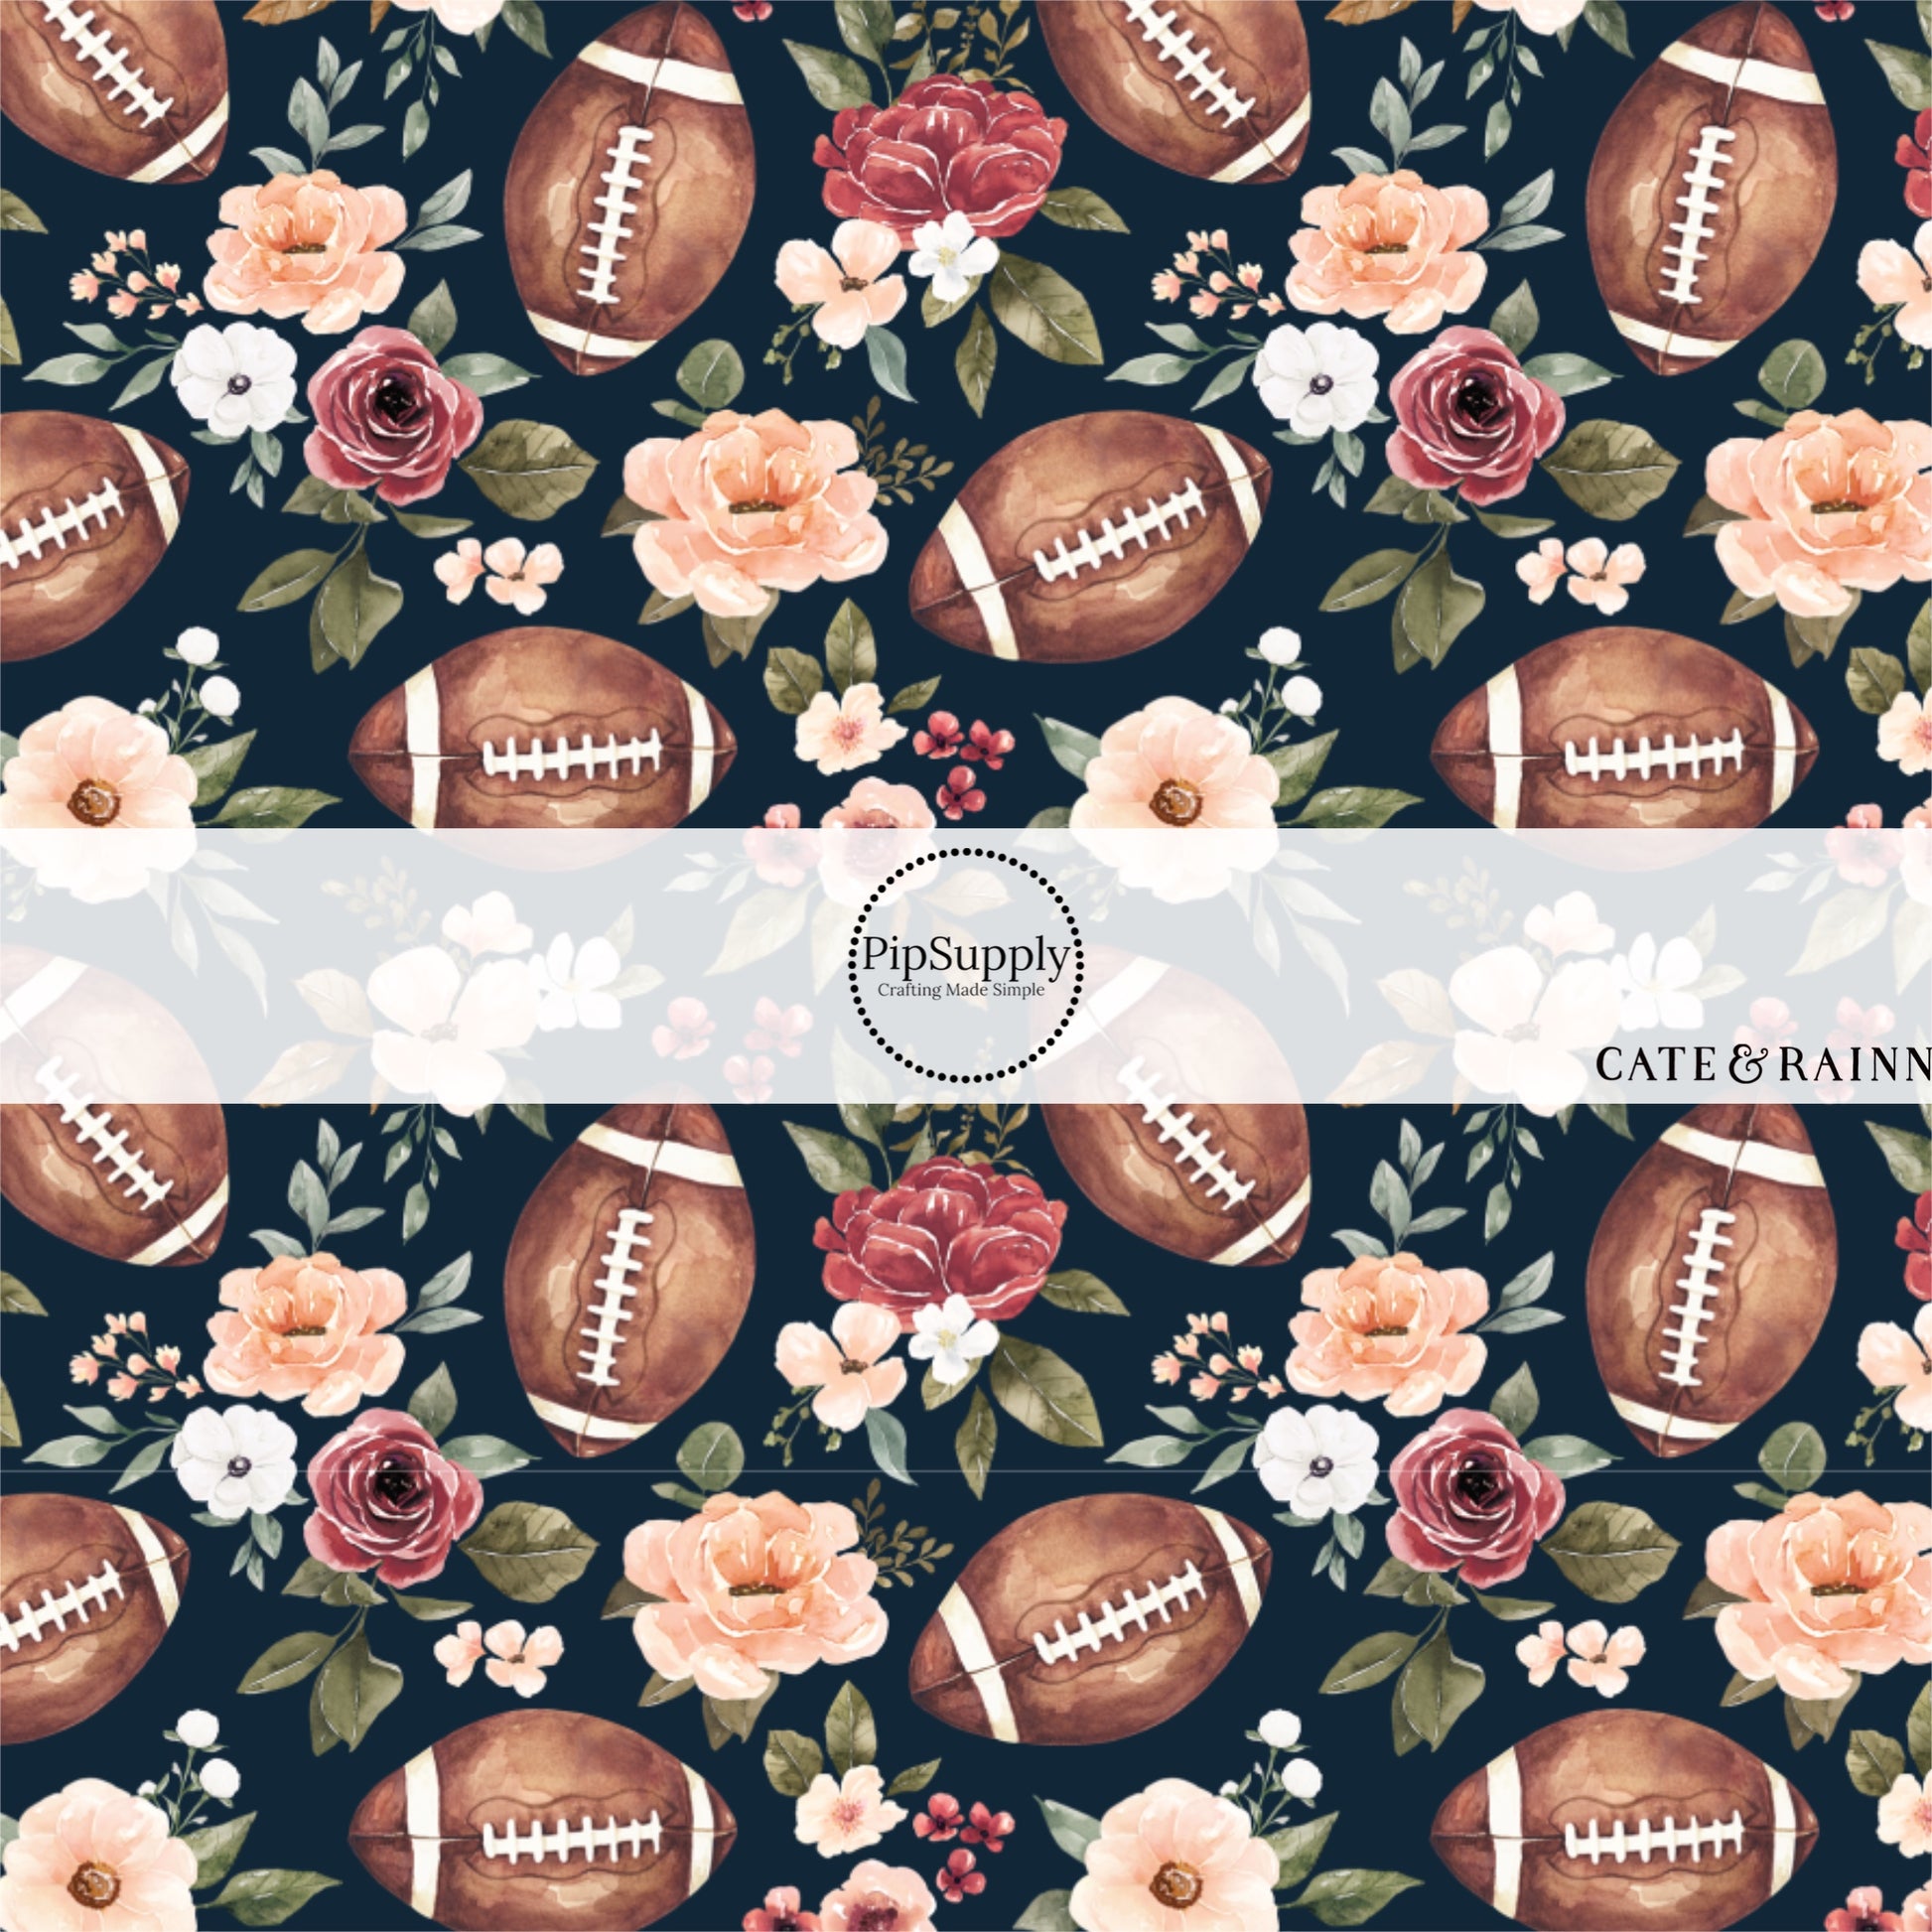 Light pink, white, and burgundy flowers with footballs on navy hair bow strips